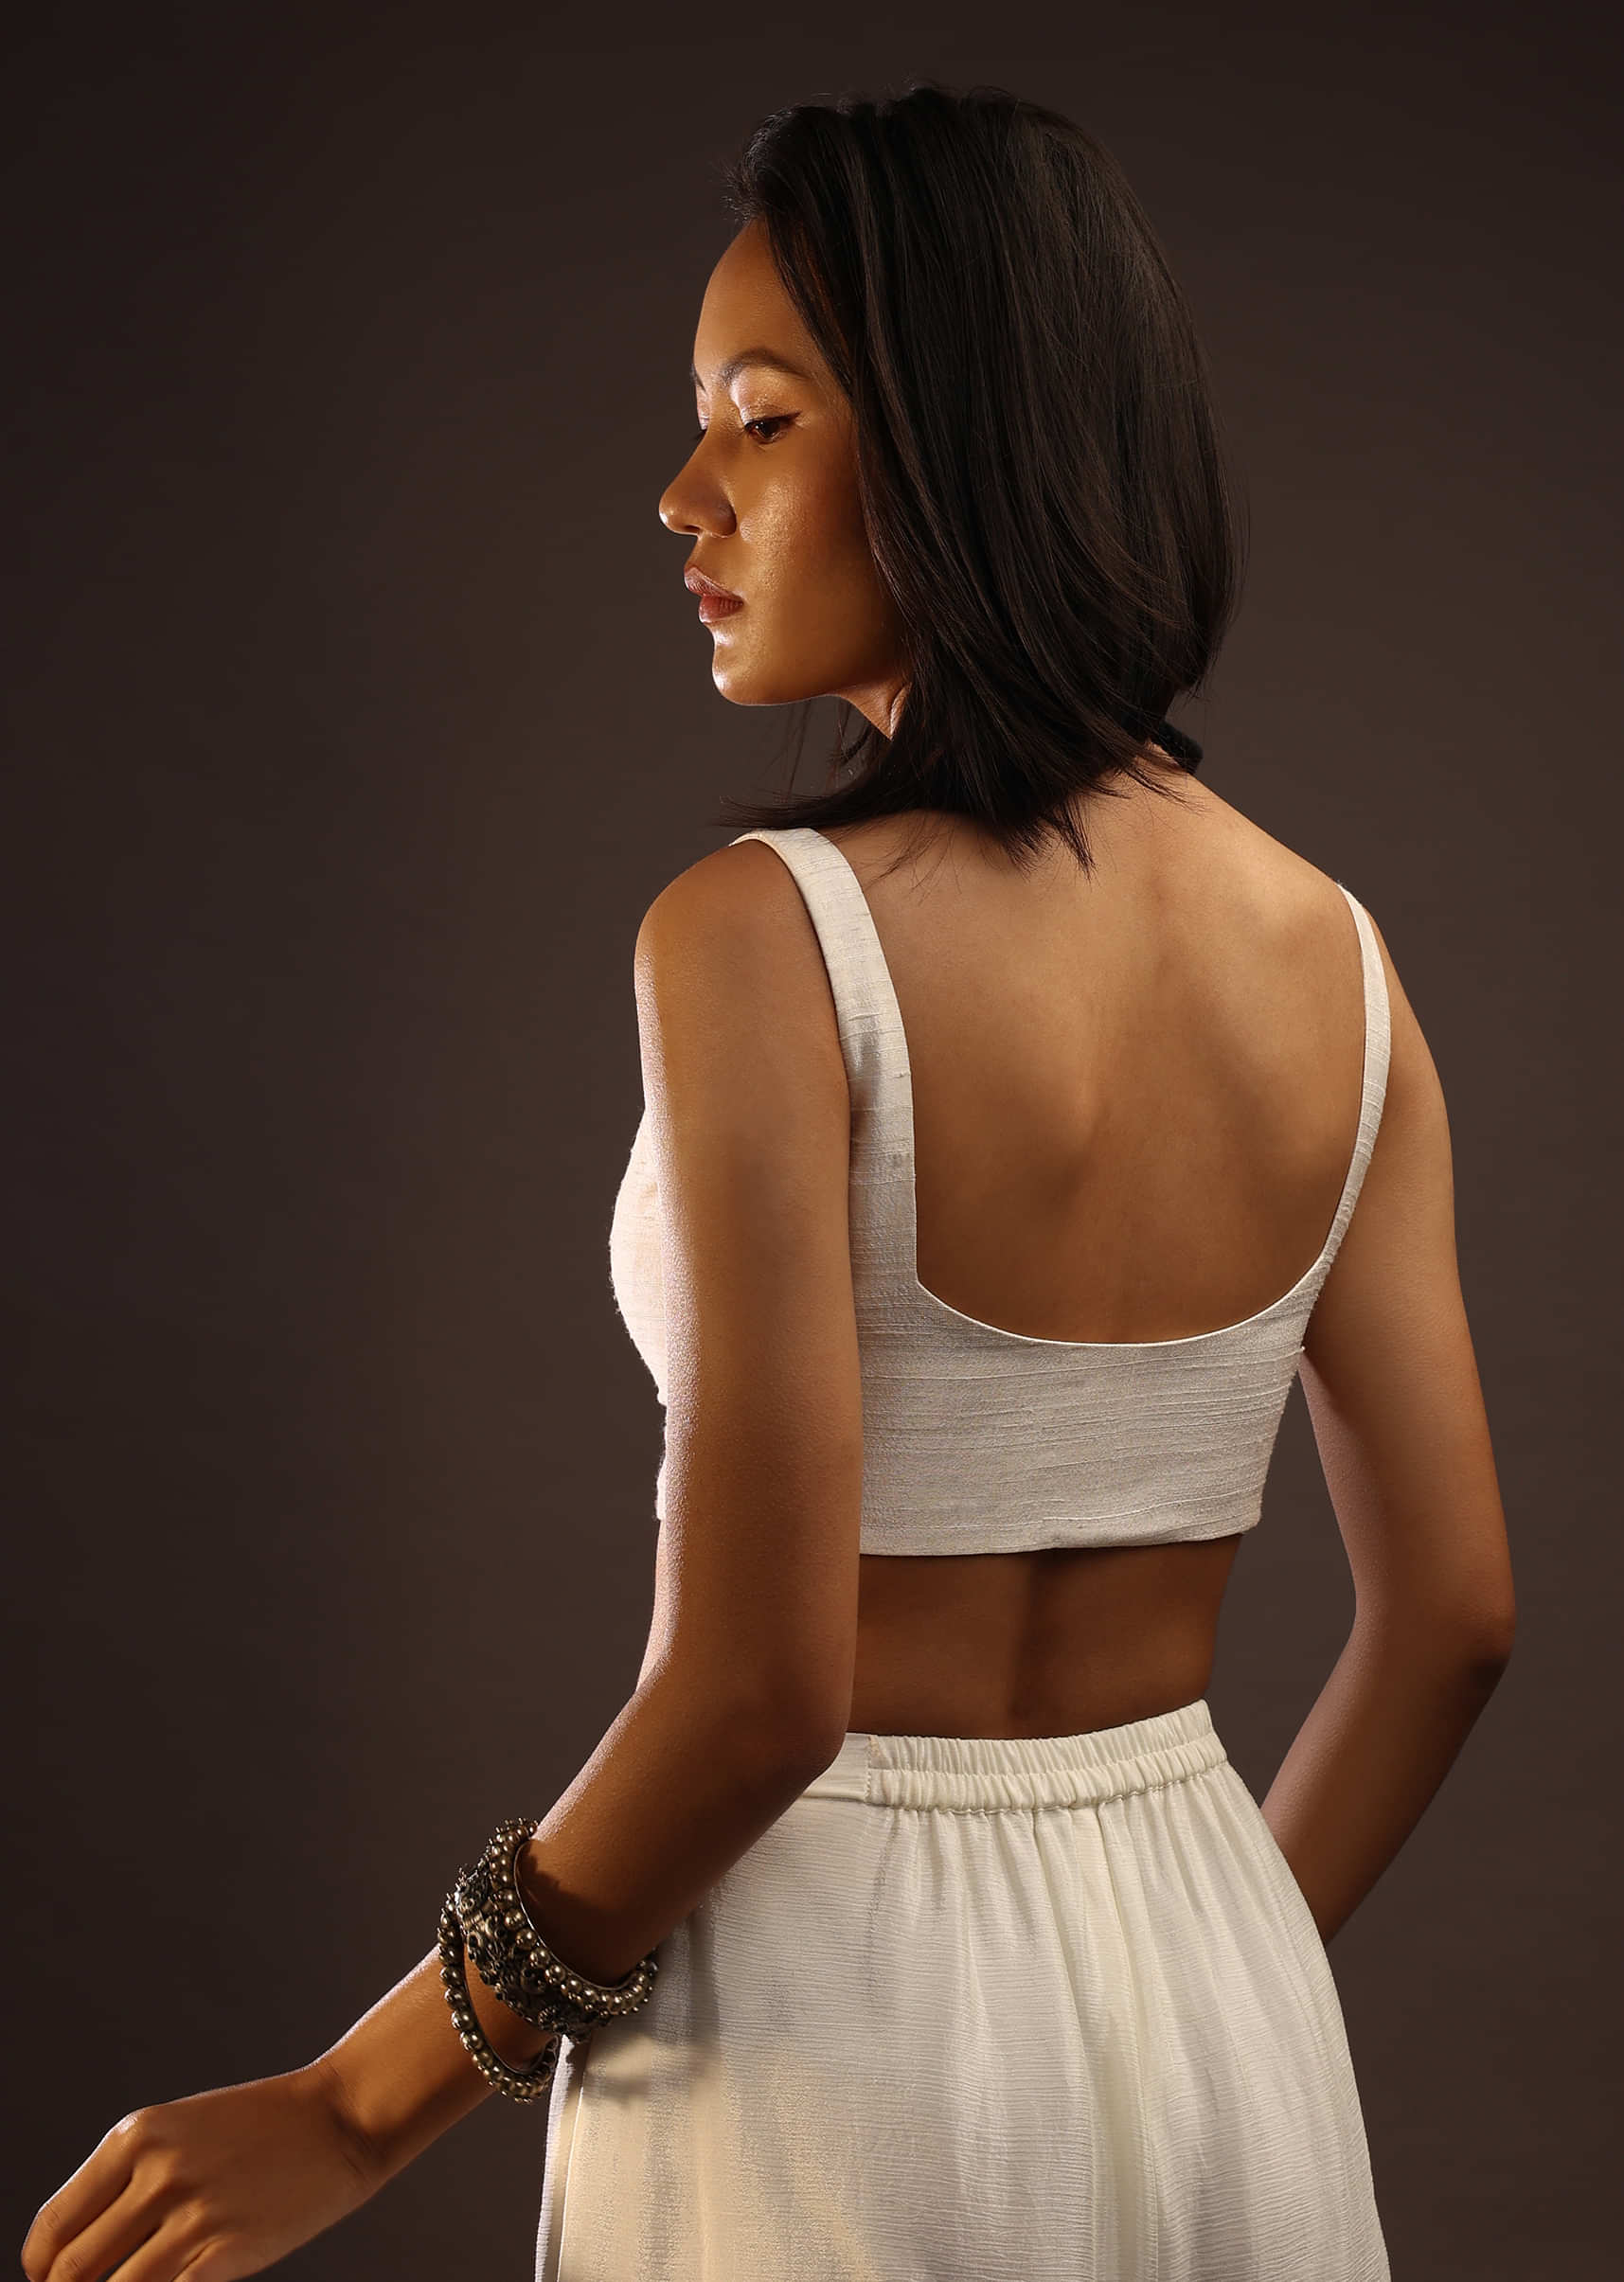 Egret White  Sleeveless Blouse With A Sweetheart Neckline. Padded With A Back Hook Closure